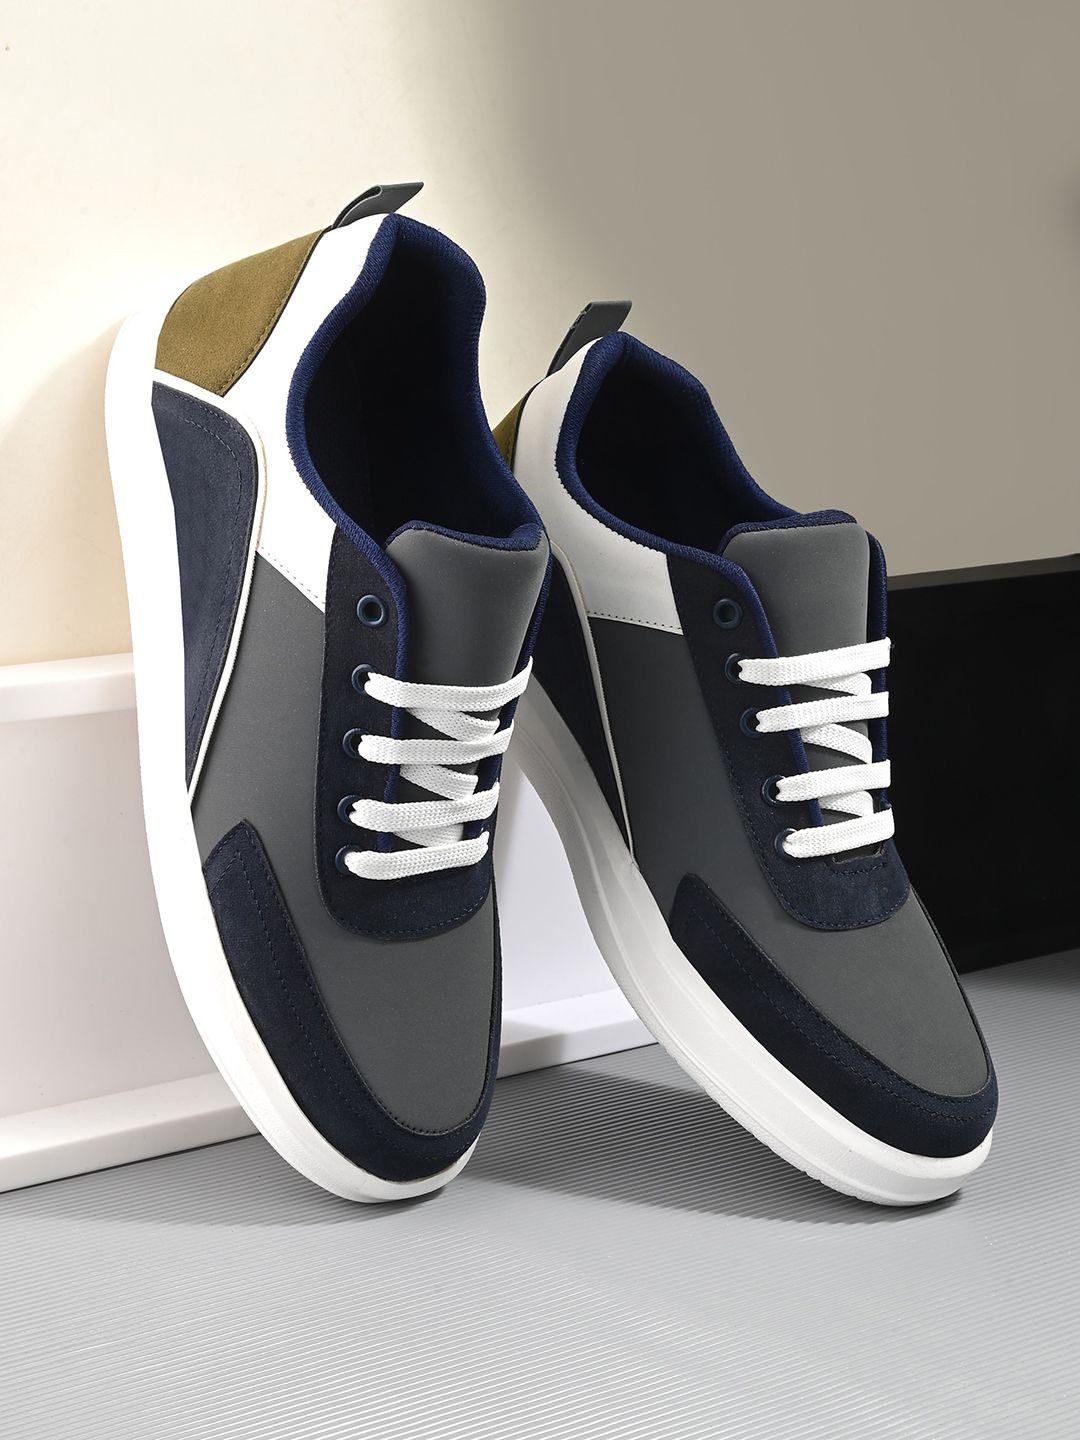 The Roadster Lifestyle Co. Men Grey & Navy Blue Colourblocked Lightweight Sneakers